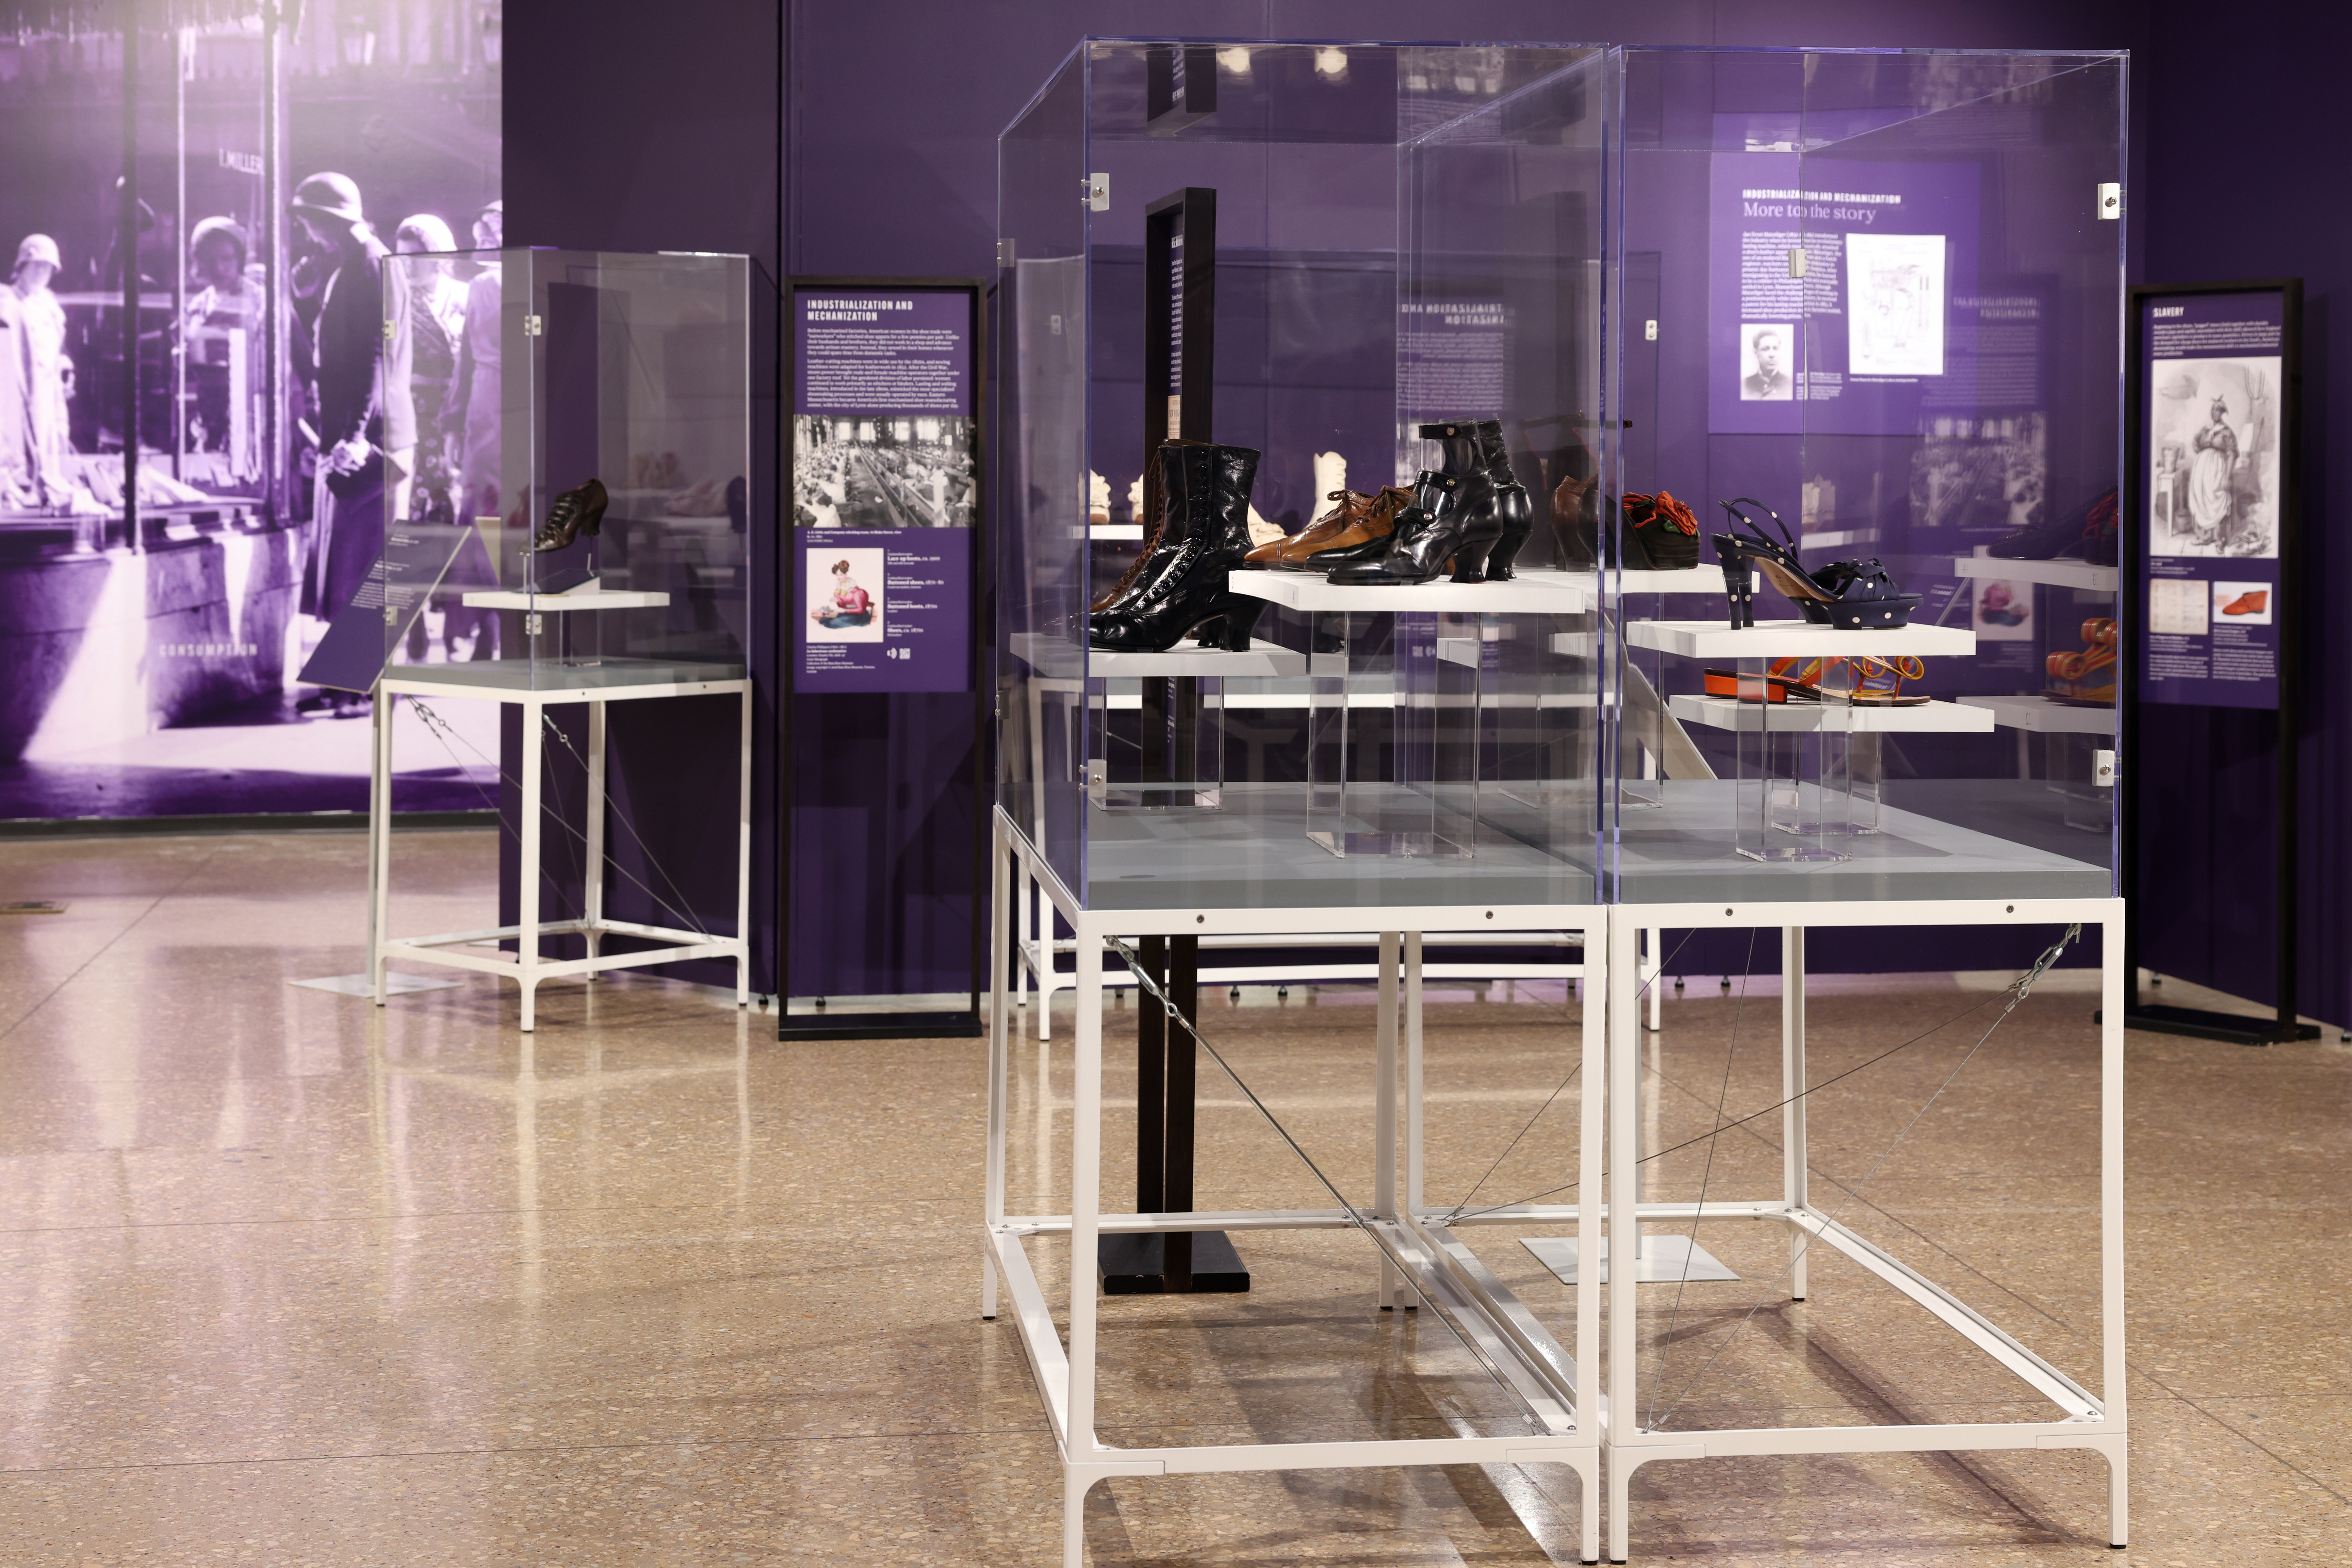 Glass display case inside a museum exhibition with various pairs of vintage shoes inside.